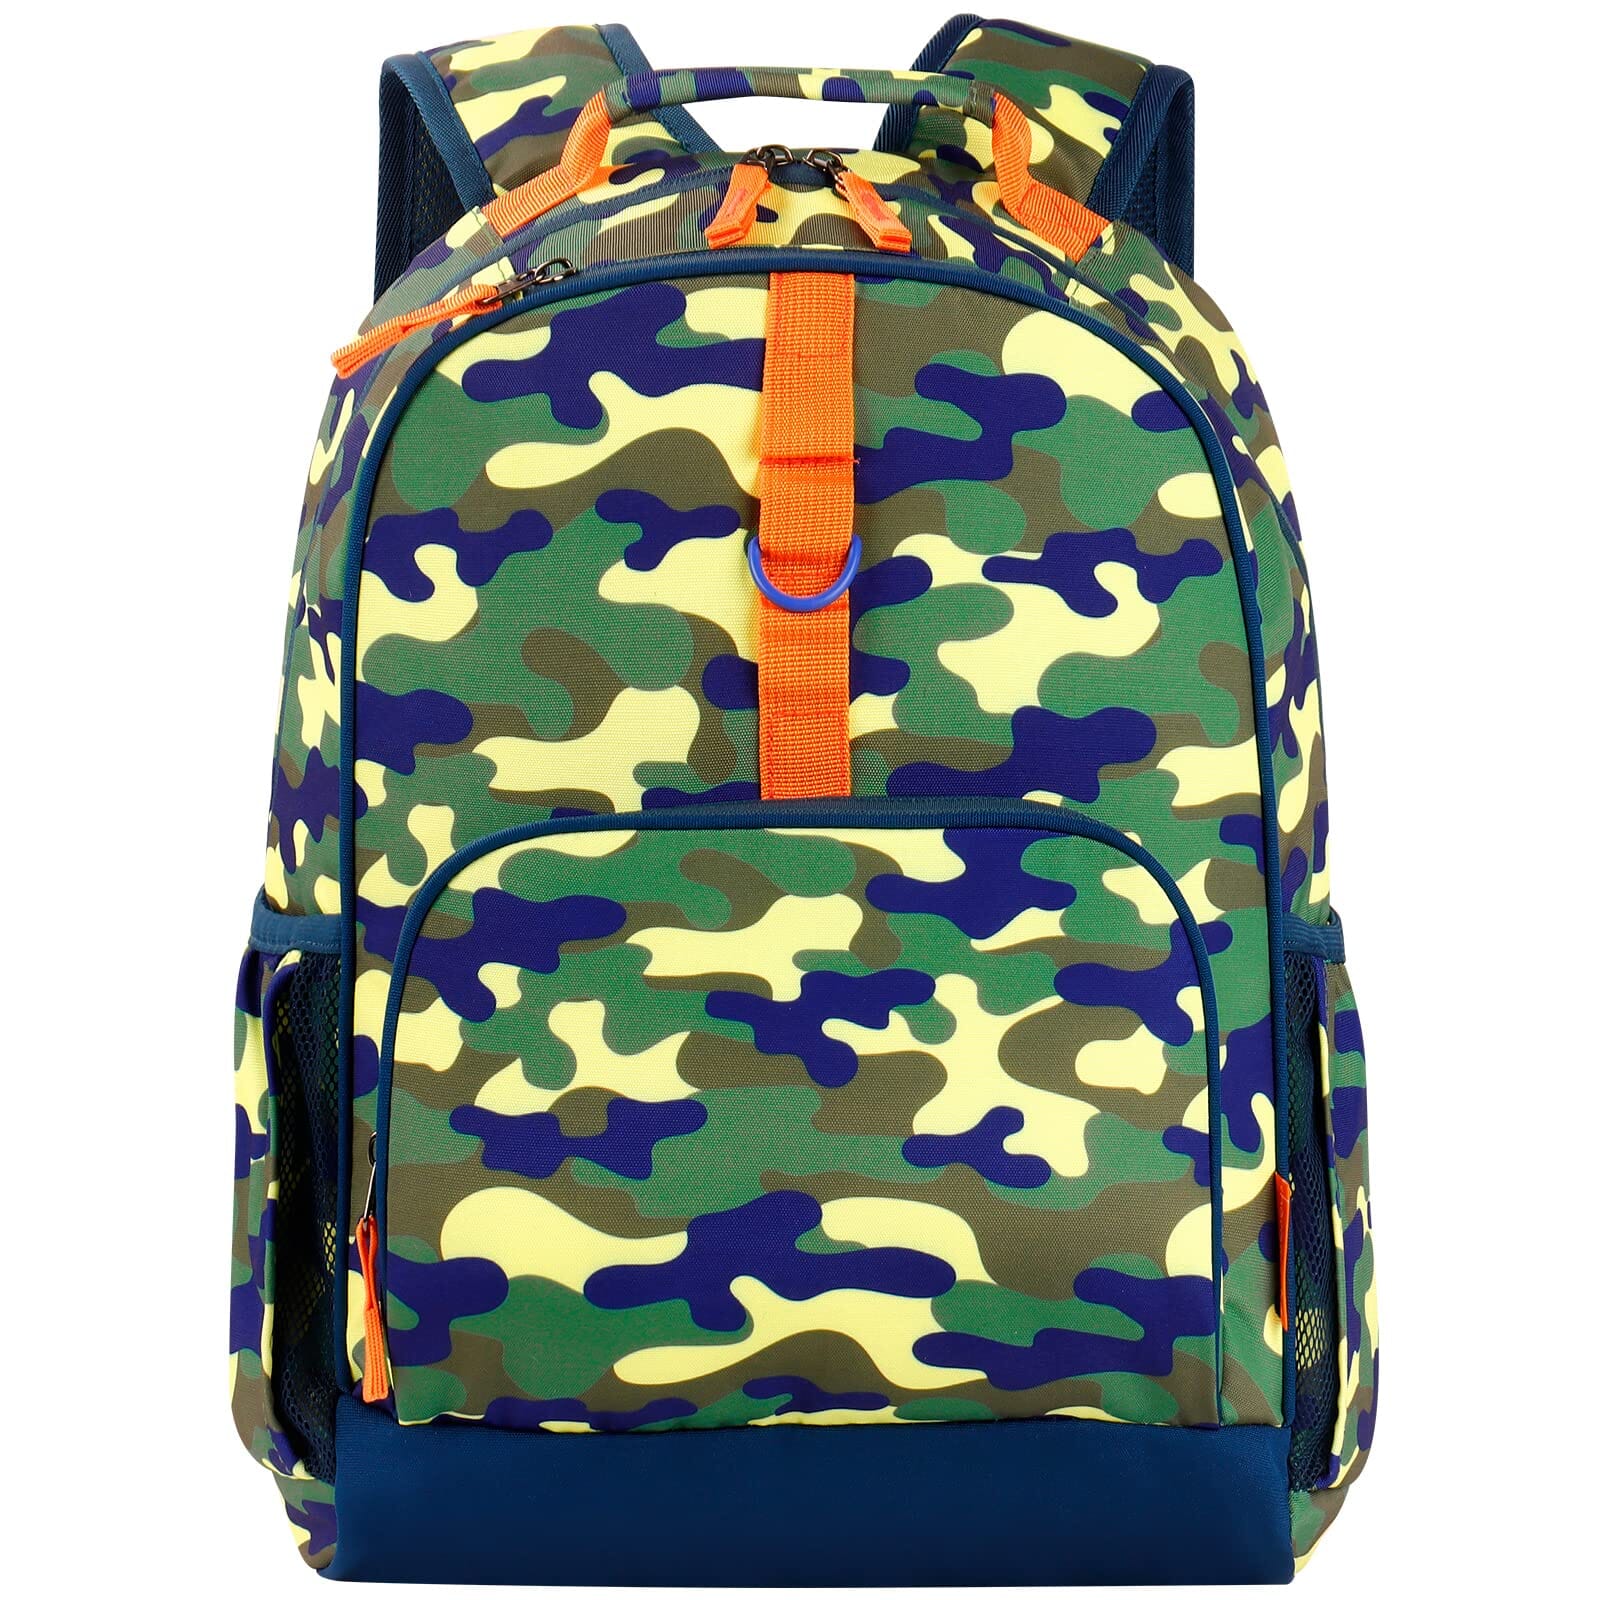 Choco Mocha Camo Backpack for Boys Backpacks for Elementary School Backpack for Kids Backpack Boys 17 inch Backpack for Boys Camouflage Bookbag with Chest Strap 5-7 6-8 School Bag 2nd 3rd Grade Yellow chocomochakids 